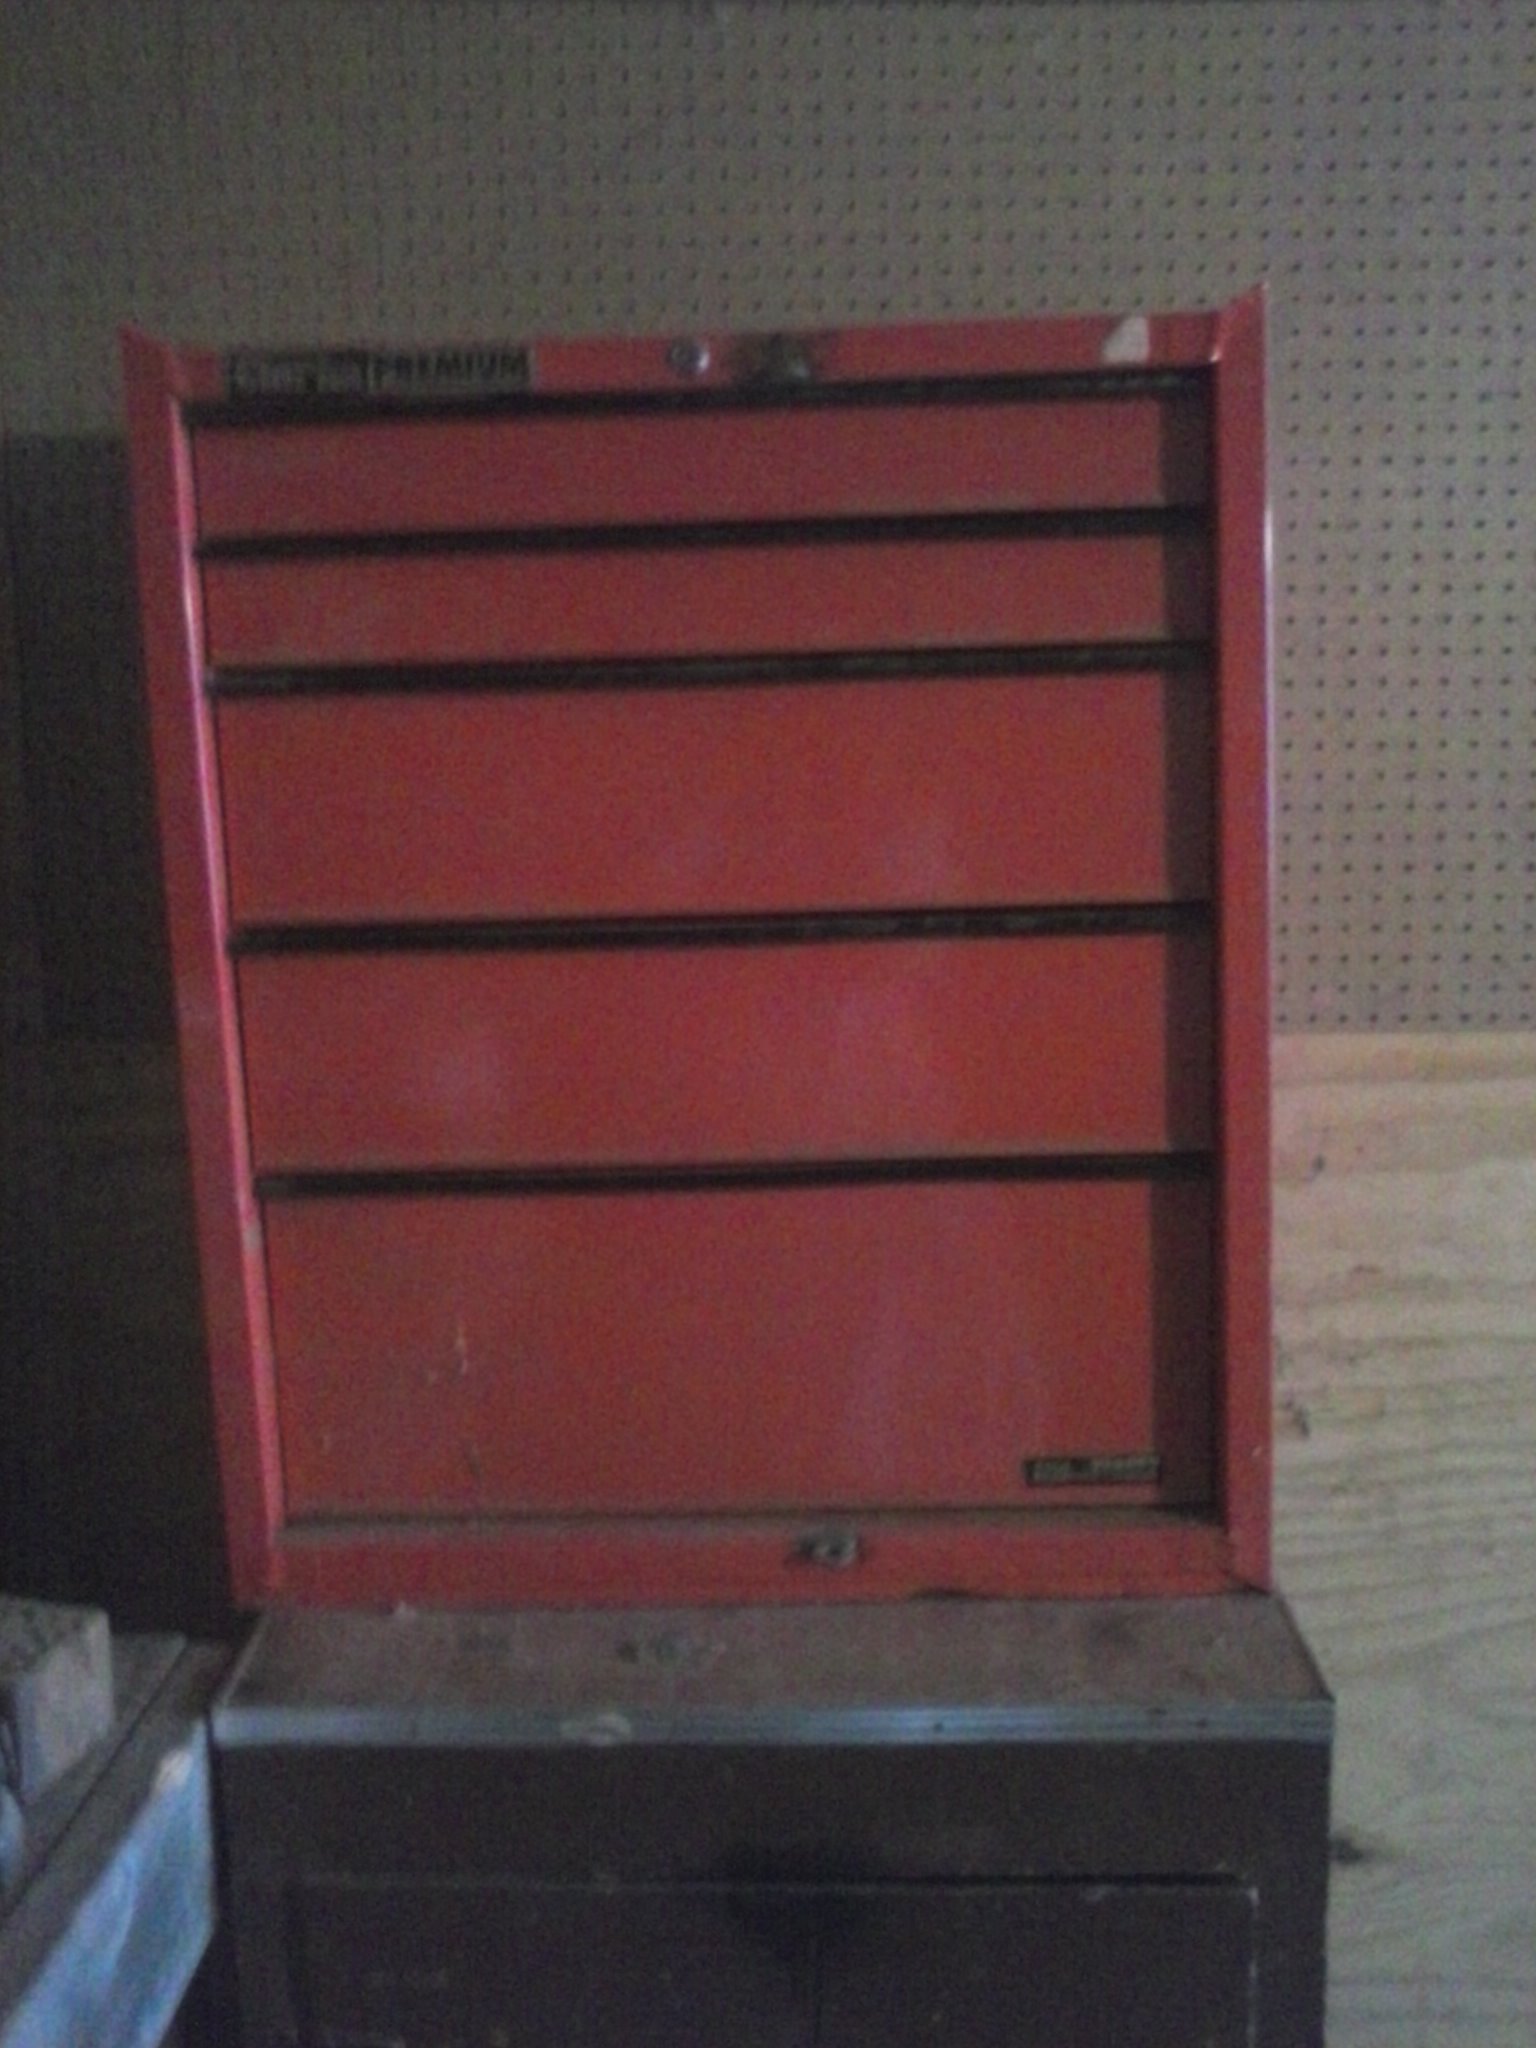 toolbox good condition asking $50 or best offer